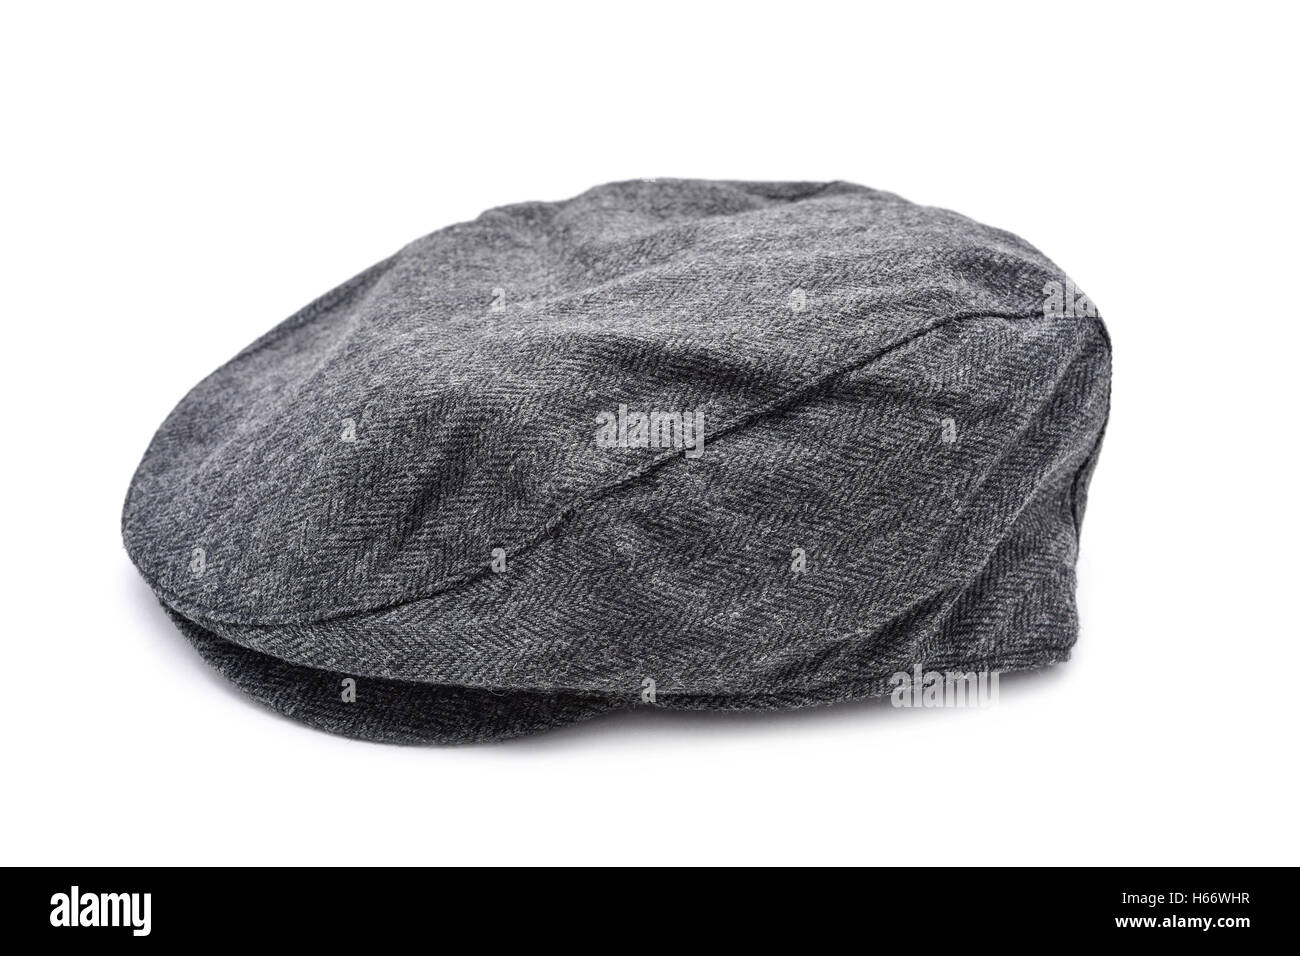 a gray flat cap on a white background Stock Photo